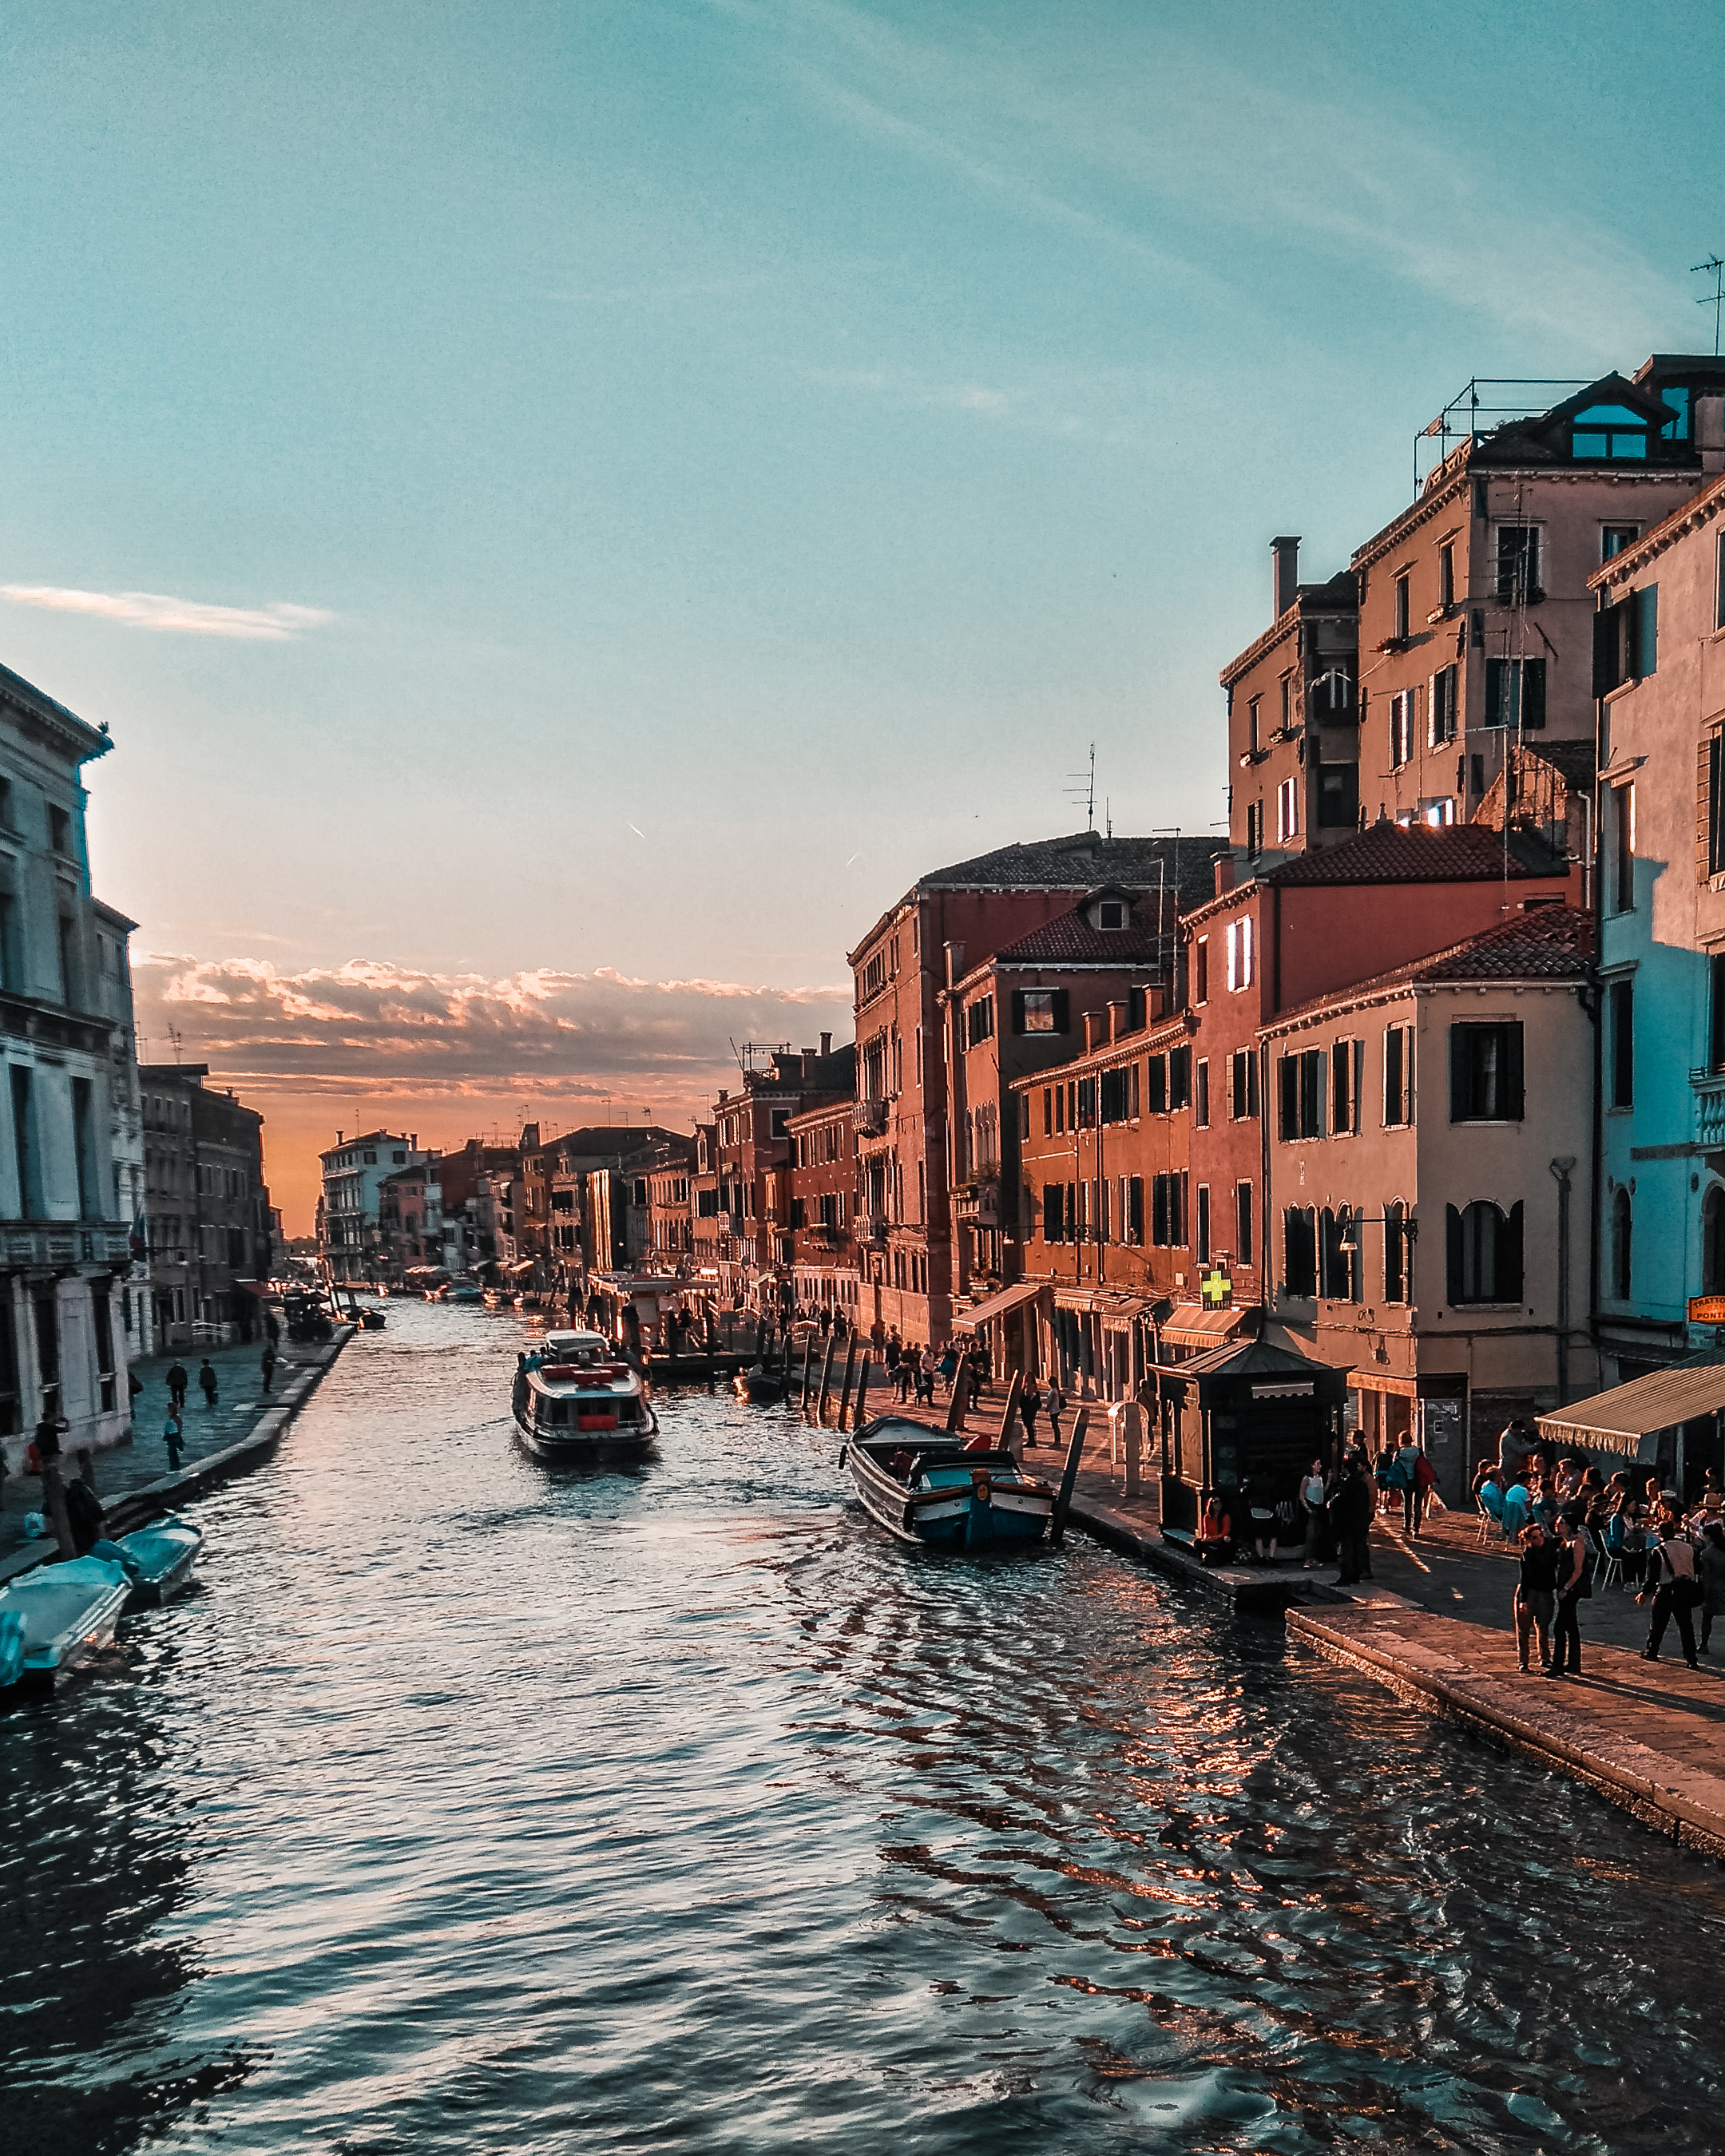 Water Taxi: Speed boats, Passing through Venetian Canals, Admiring the landscape of Venice. 2160x2700 HD Background.